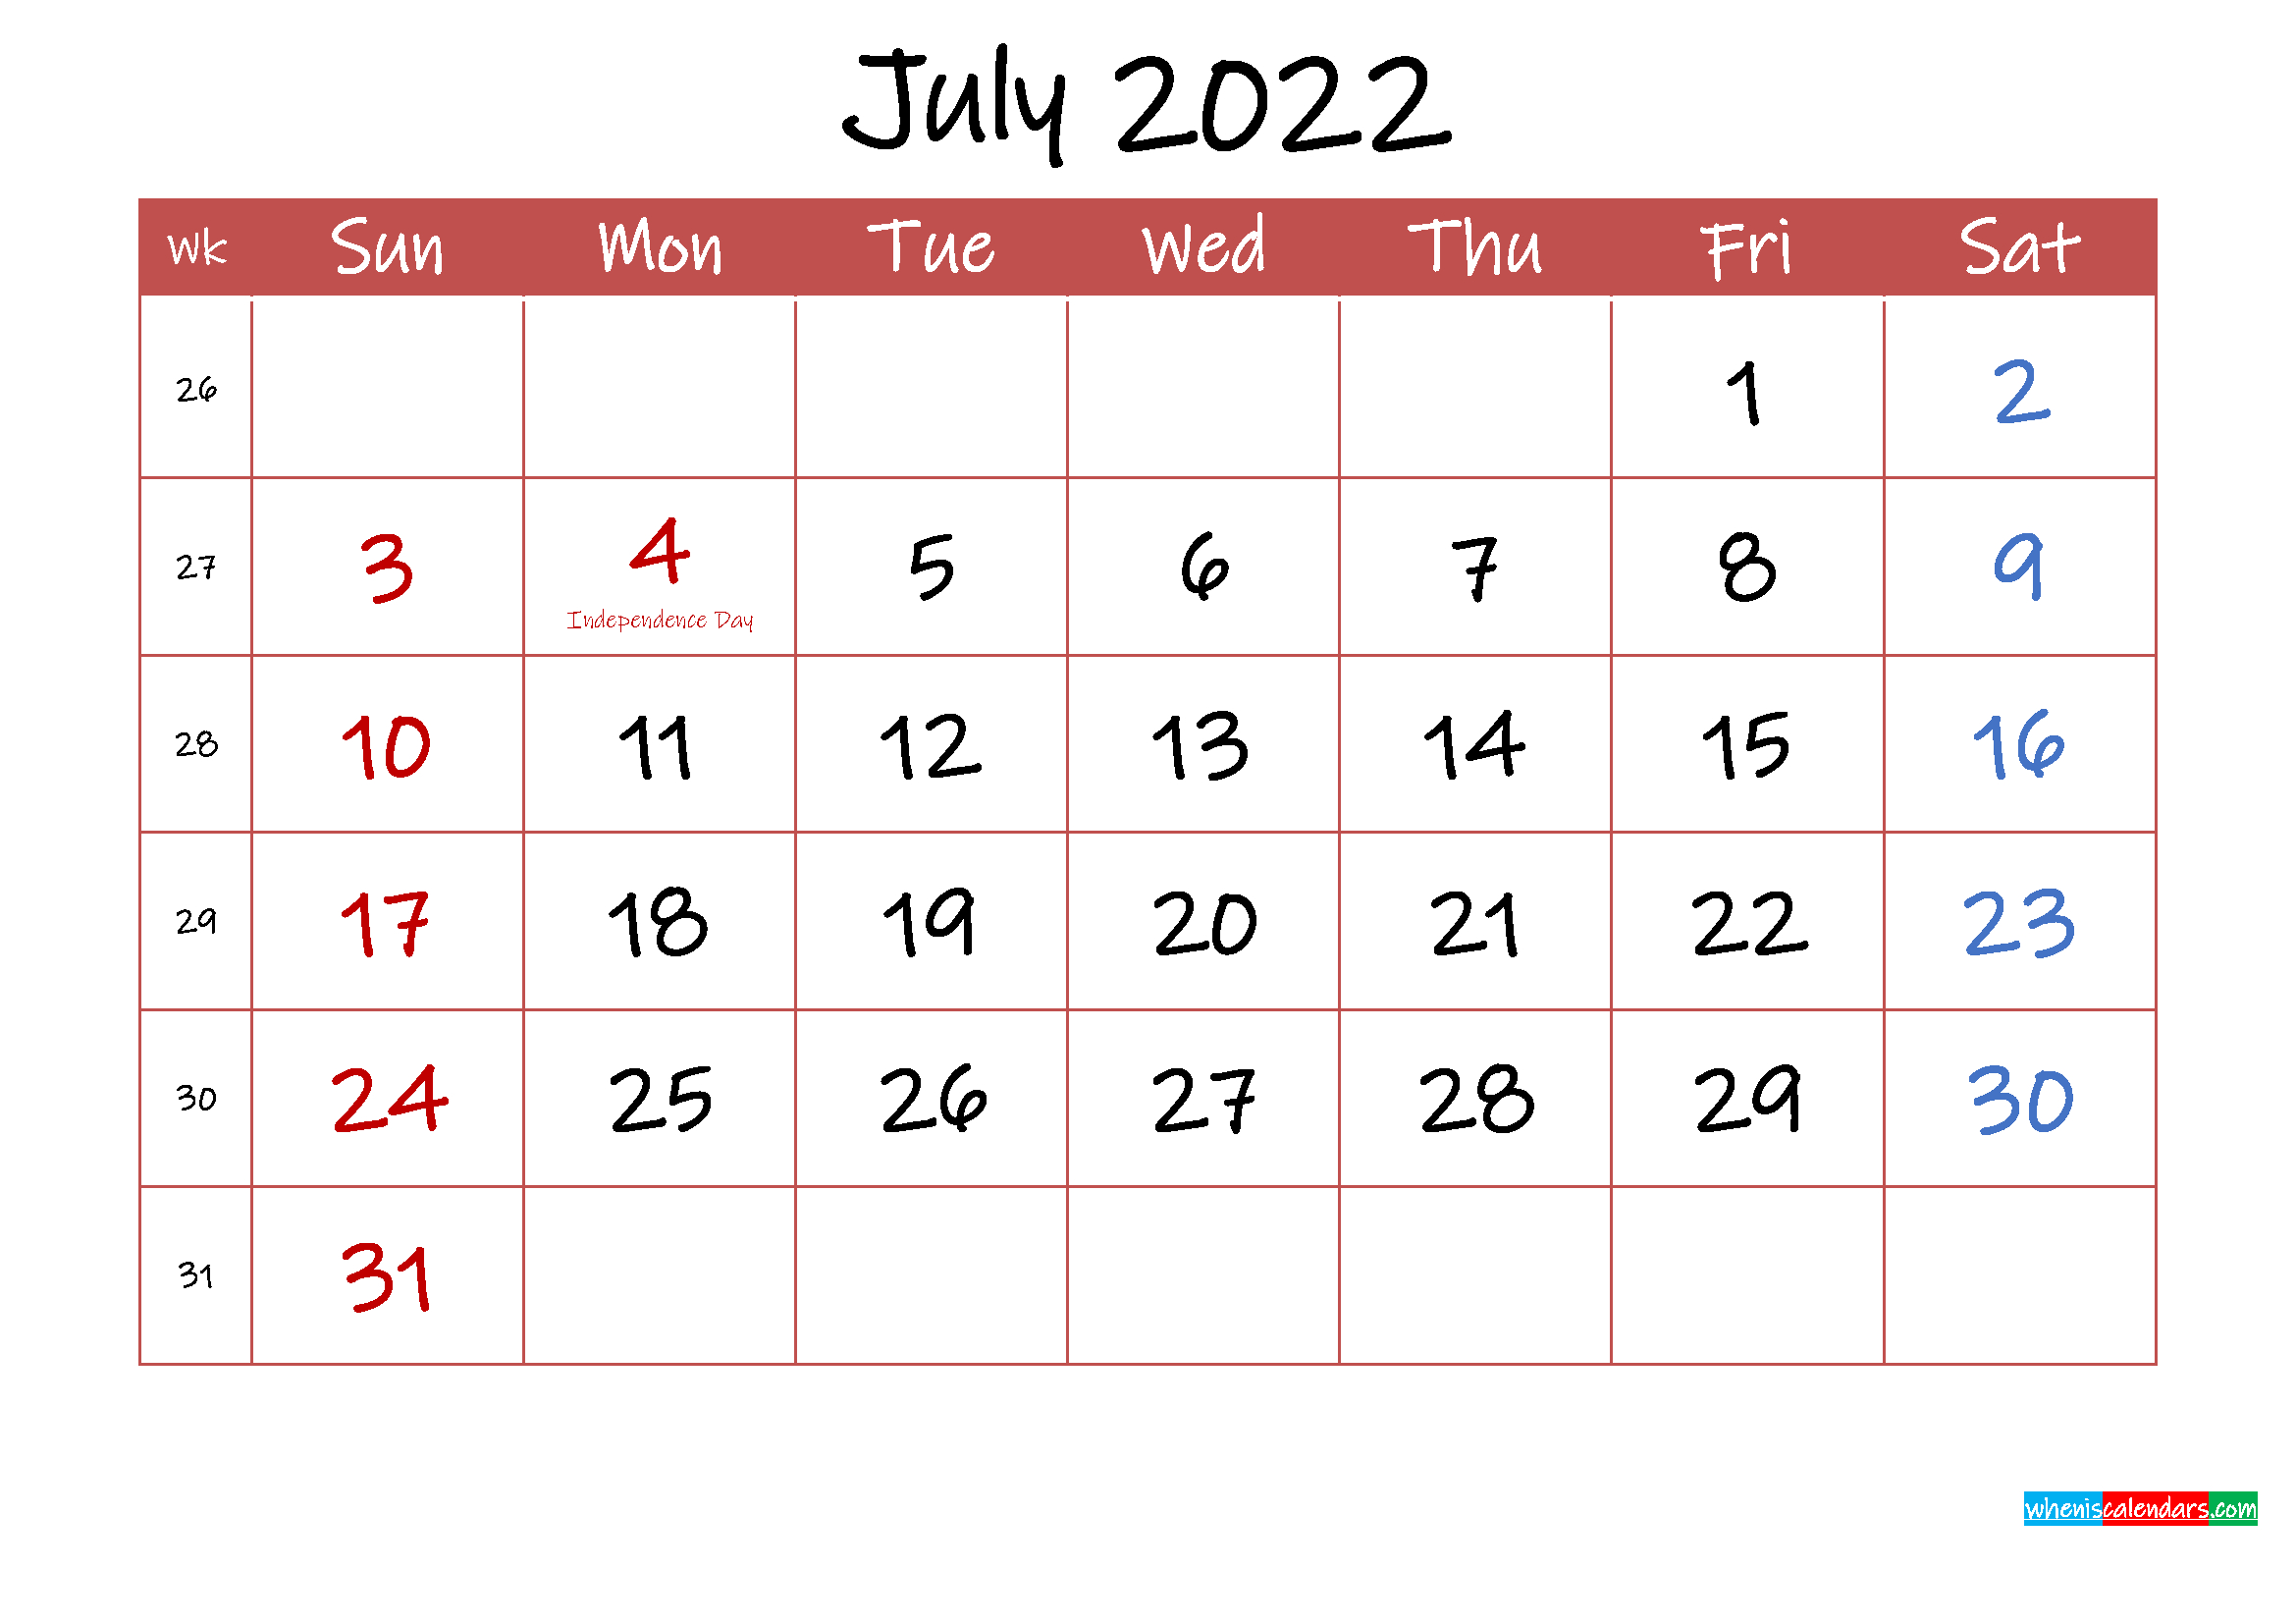 Printable July 2022 Calendar With Holidays - Template Ink22M31-2022 Printable Monthly Calendar With Holidays